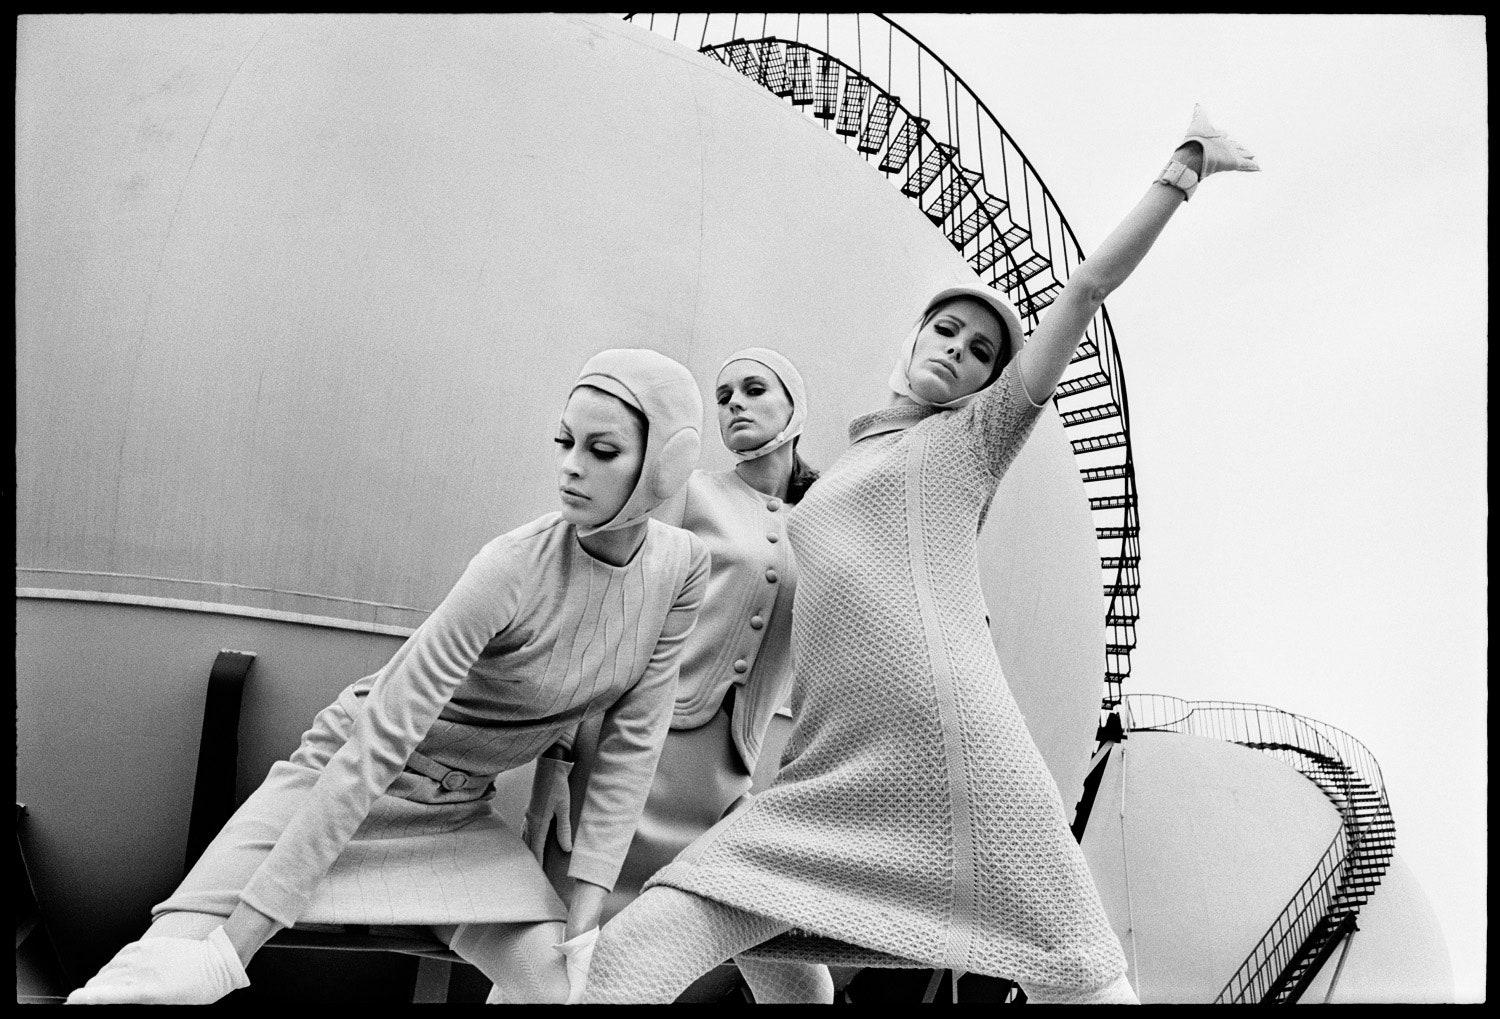 How Gösta Peterson the Photographers Photographer Kept a Low Profile While Making Fashion History